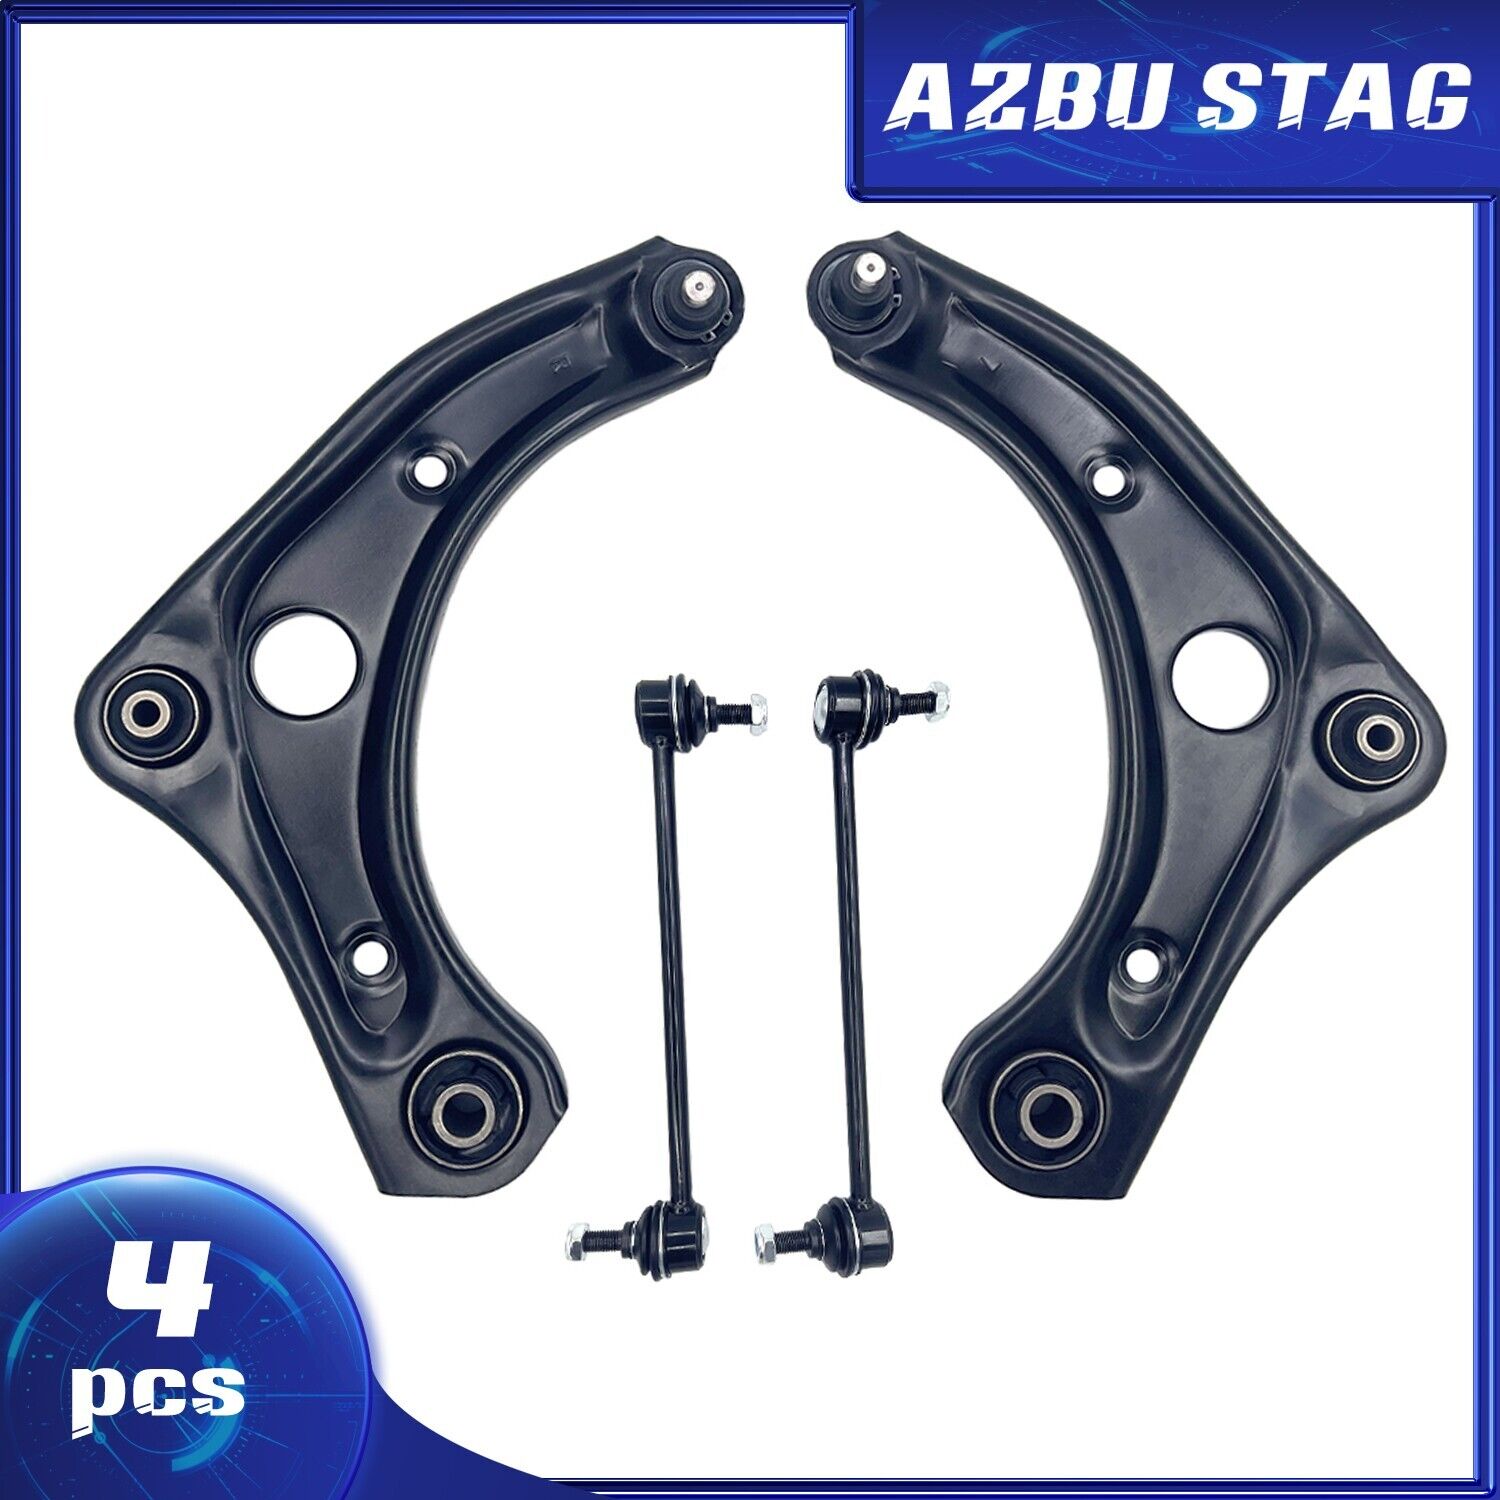 AzbuStag Control Arm Kit With Sway Bar for 2013-2019 Nissan Versa Micra - 4Pcs